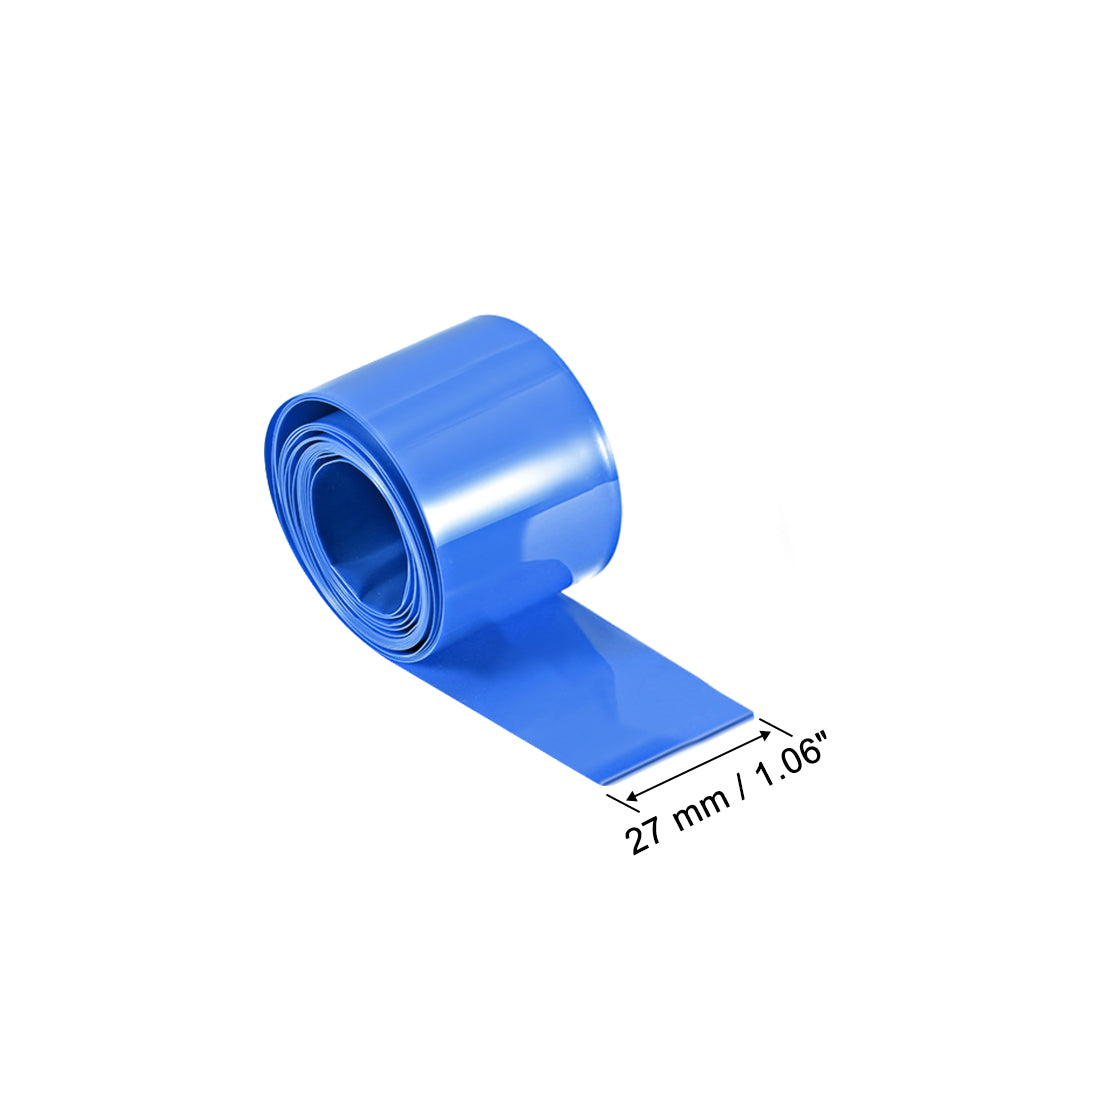 Uxcell Uxcell PVC Heat Shrink Tube 27mm Flat Width Wrap for Single 16340 2 Meter Blue